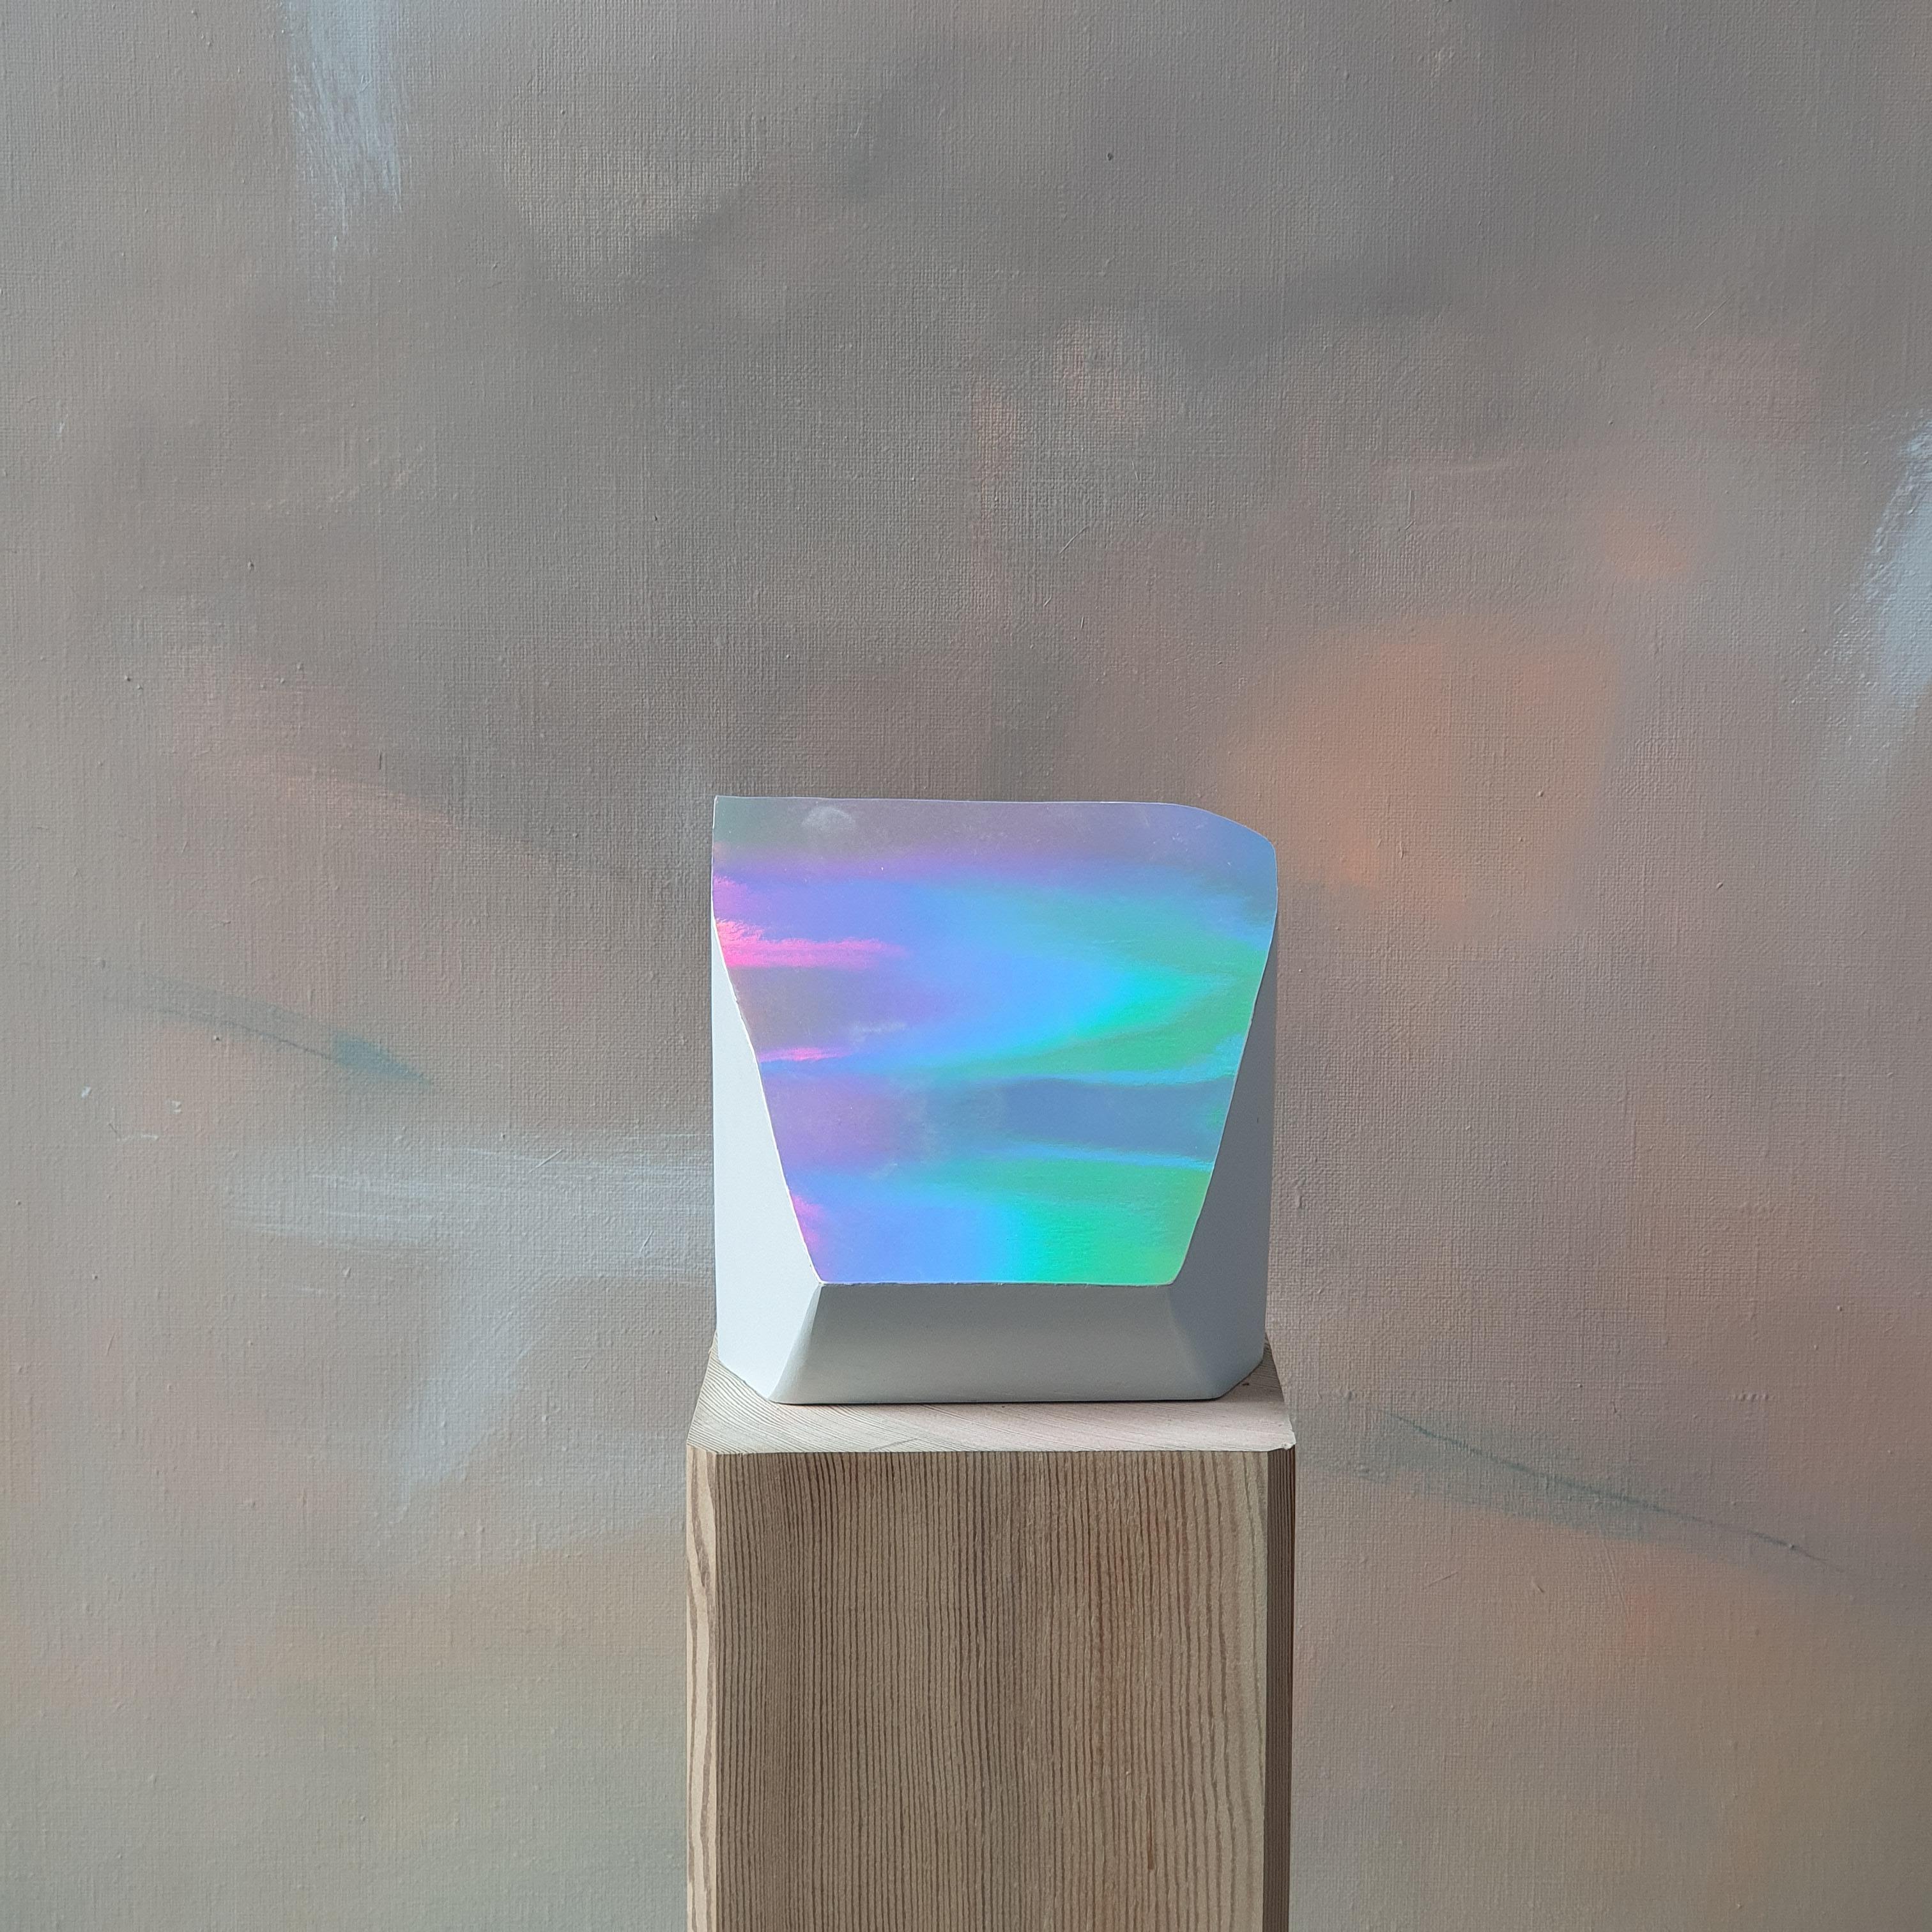 Size: 14x13x14 cm, include pedestal (solid pine wood) of 50cm 

Medium: Wood, acrylic and holographic print.

If painting still respects a logic that legitimizes its practice and existence in our hyper-saturated civilization of the image, it is its